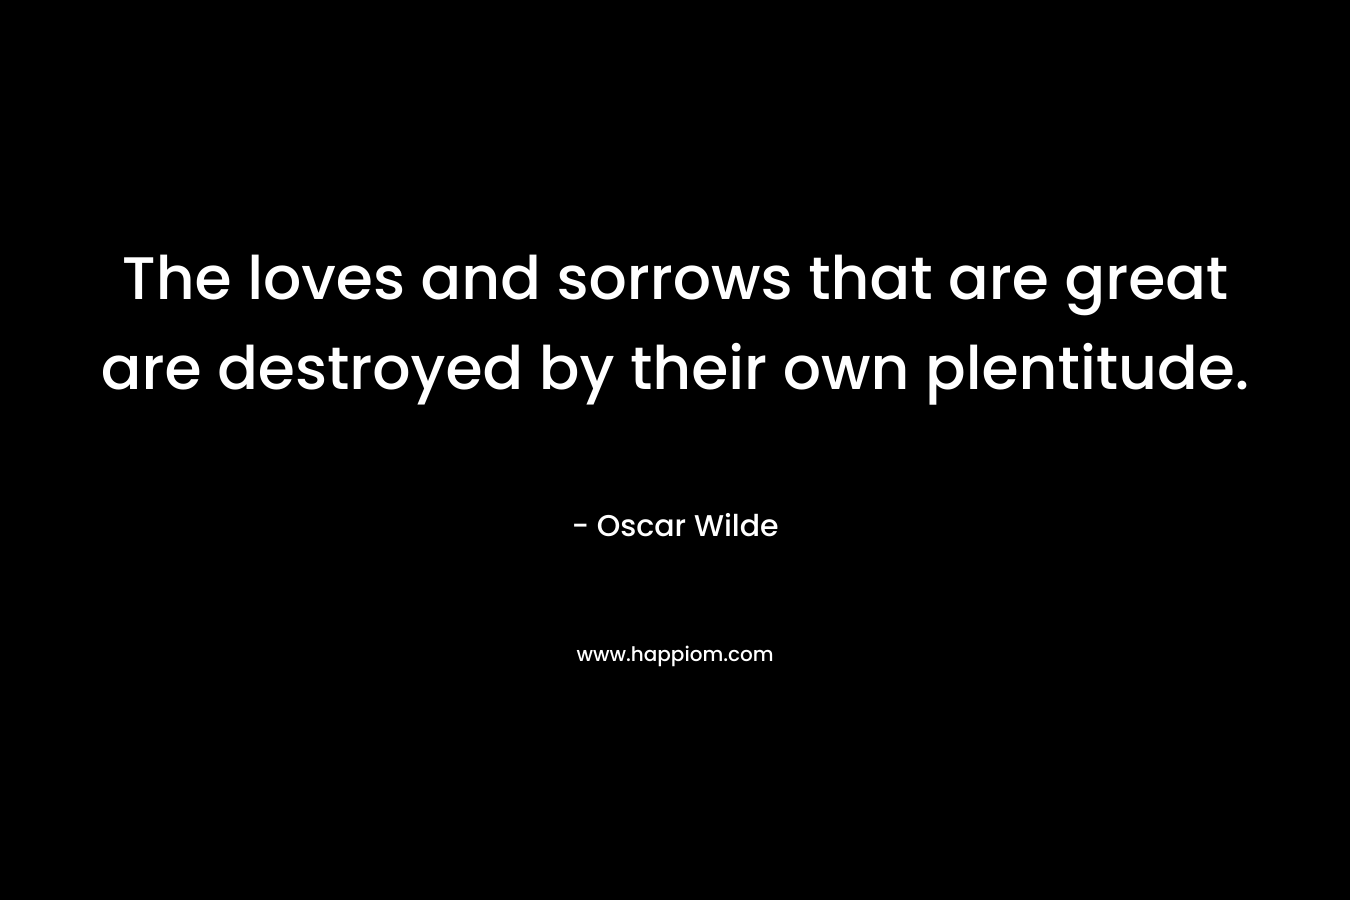 The loves and sorrows that are great are destroyed by their own plentitude.